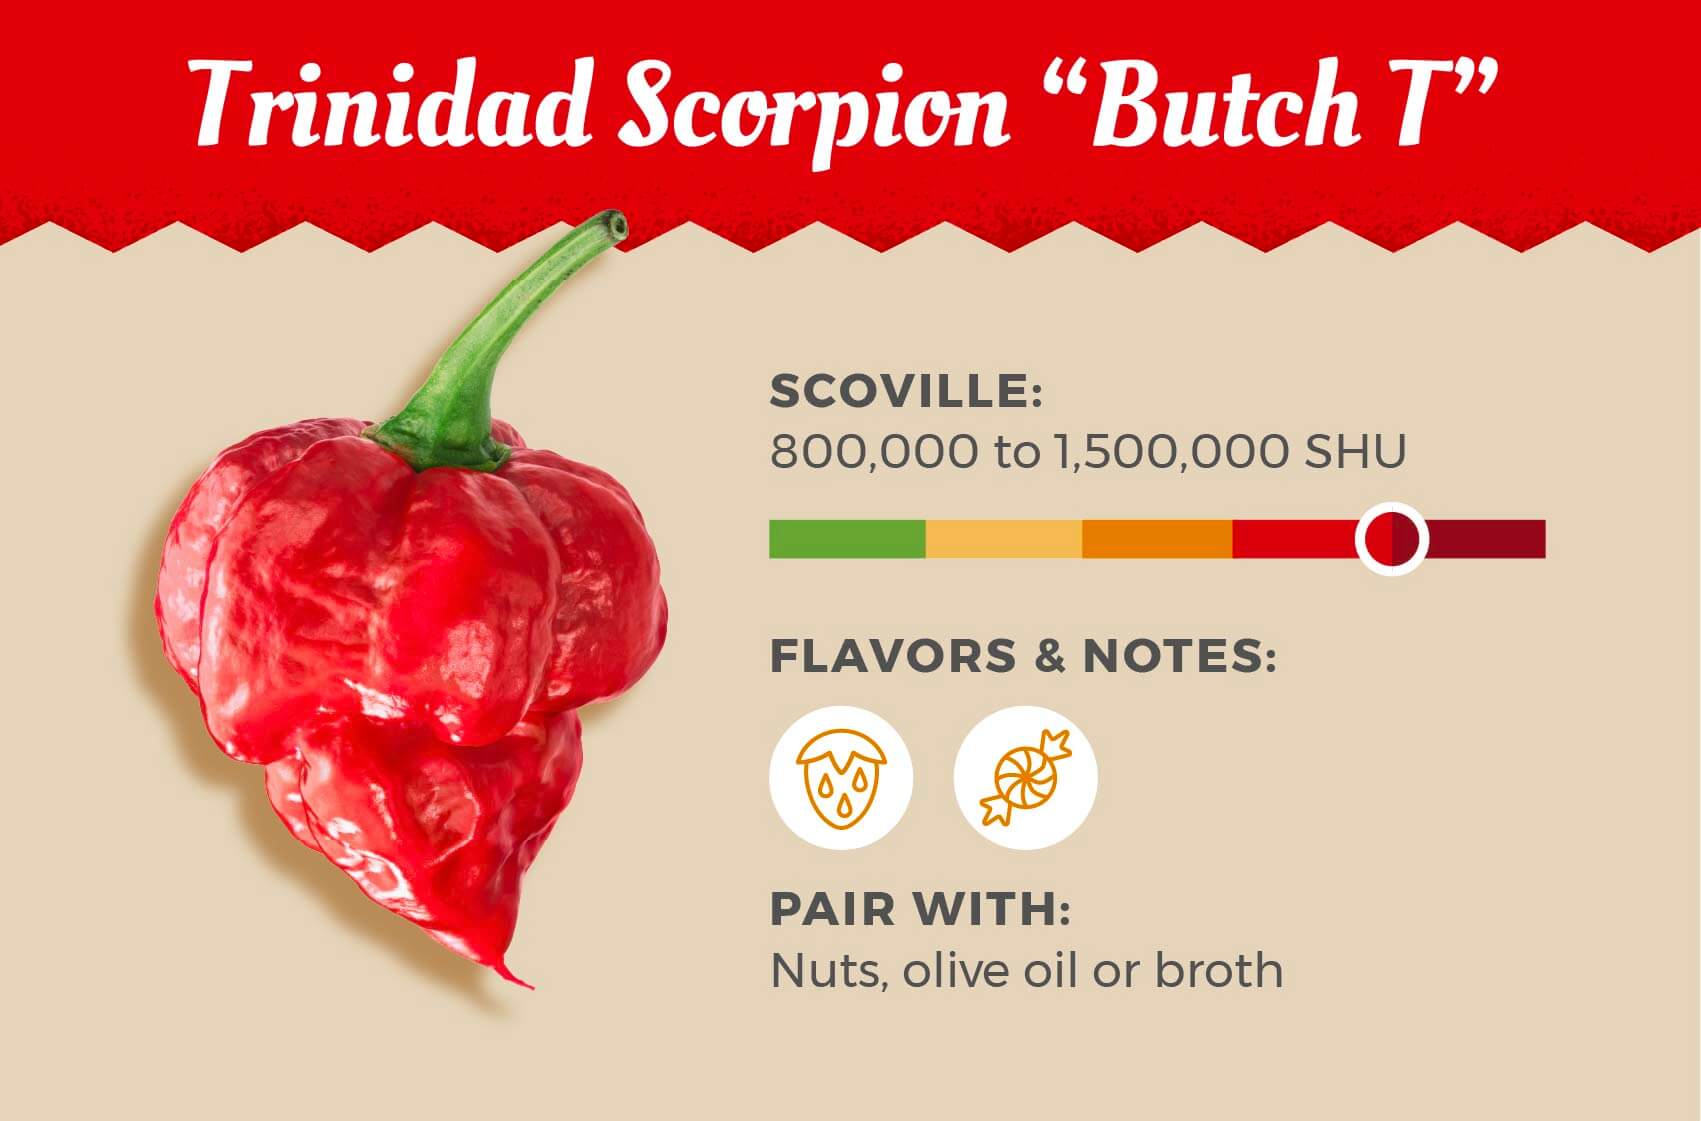 Trinidad Scorpion Butch T is the number 5 hottest pepper on this list with a high score of 1.5 million Scoville heat units, pair it with nuts, olive oil or broth.